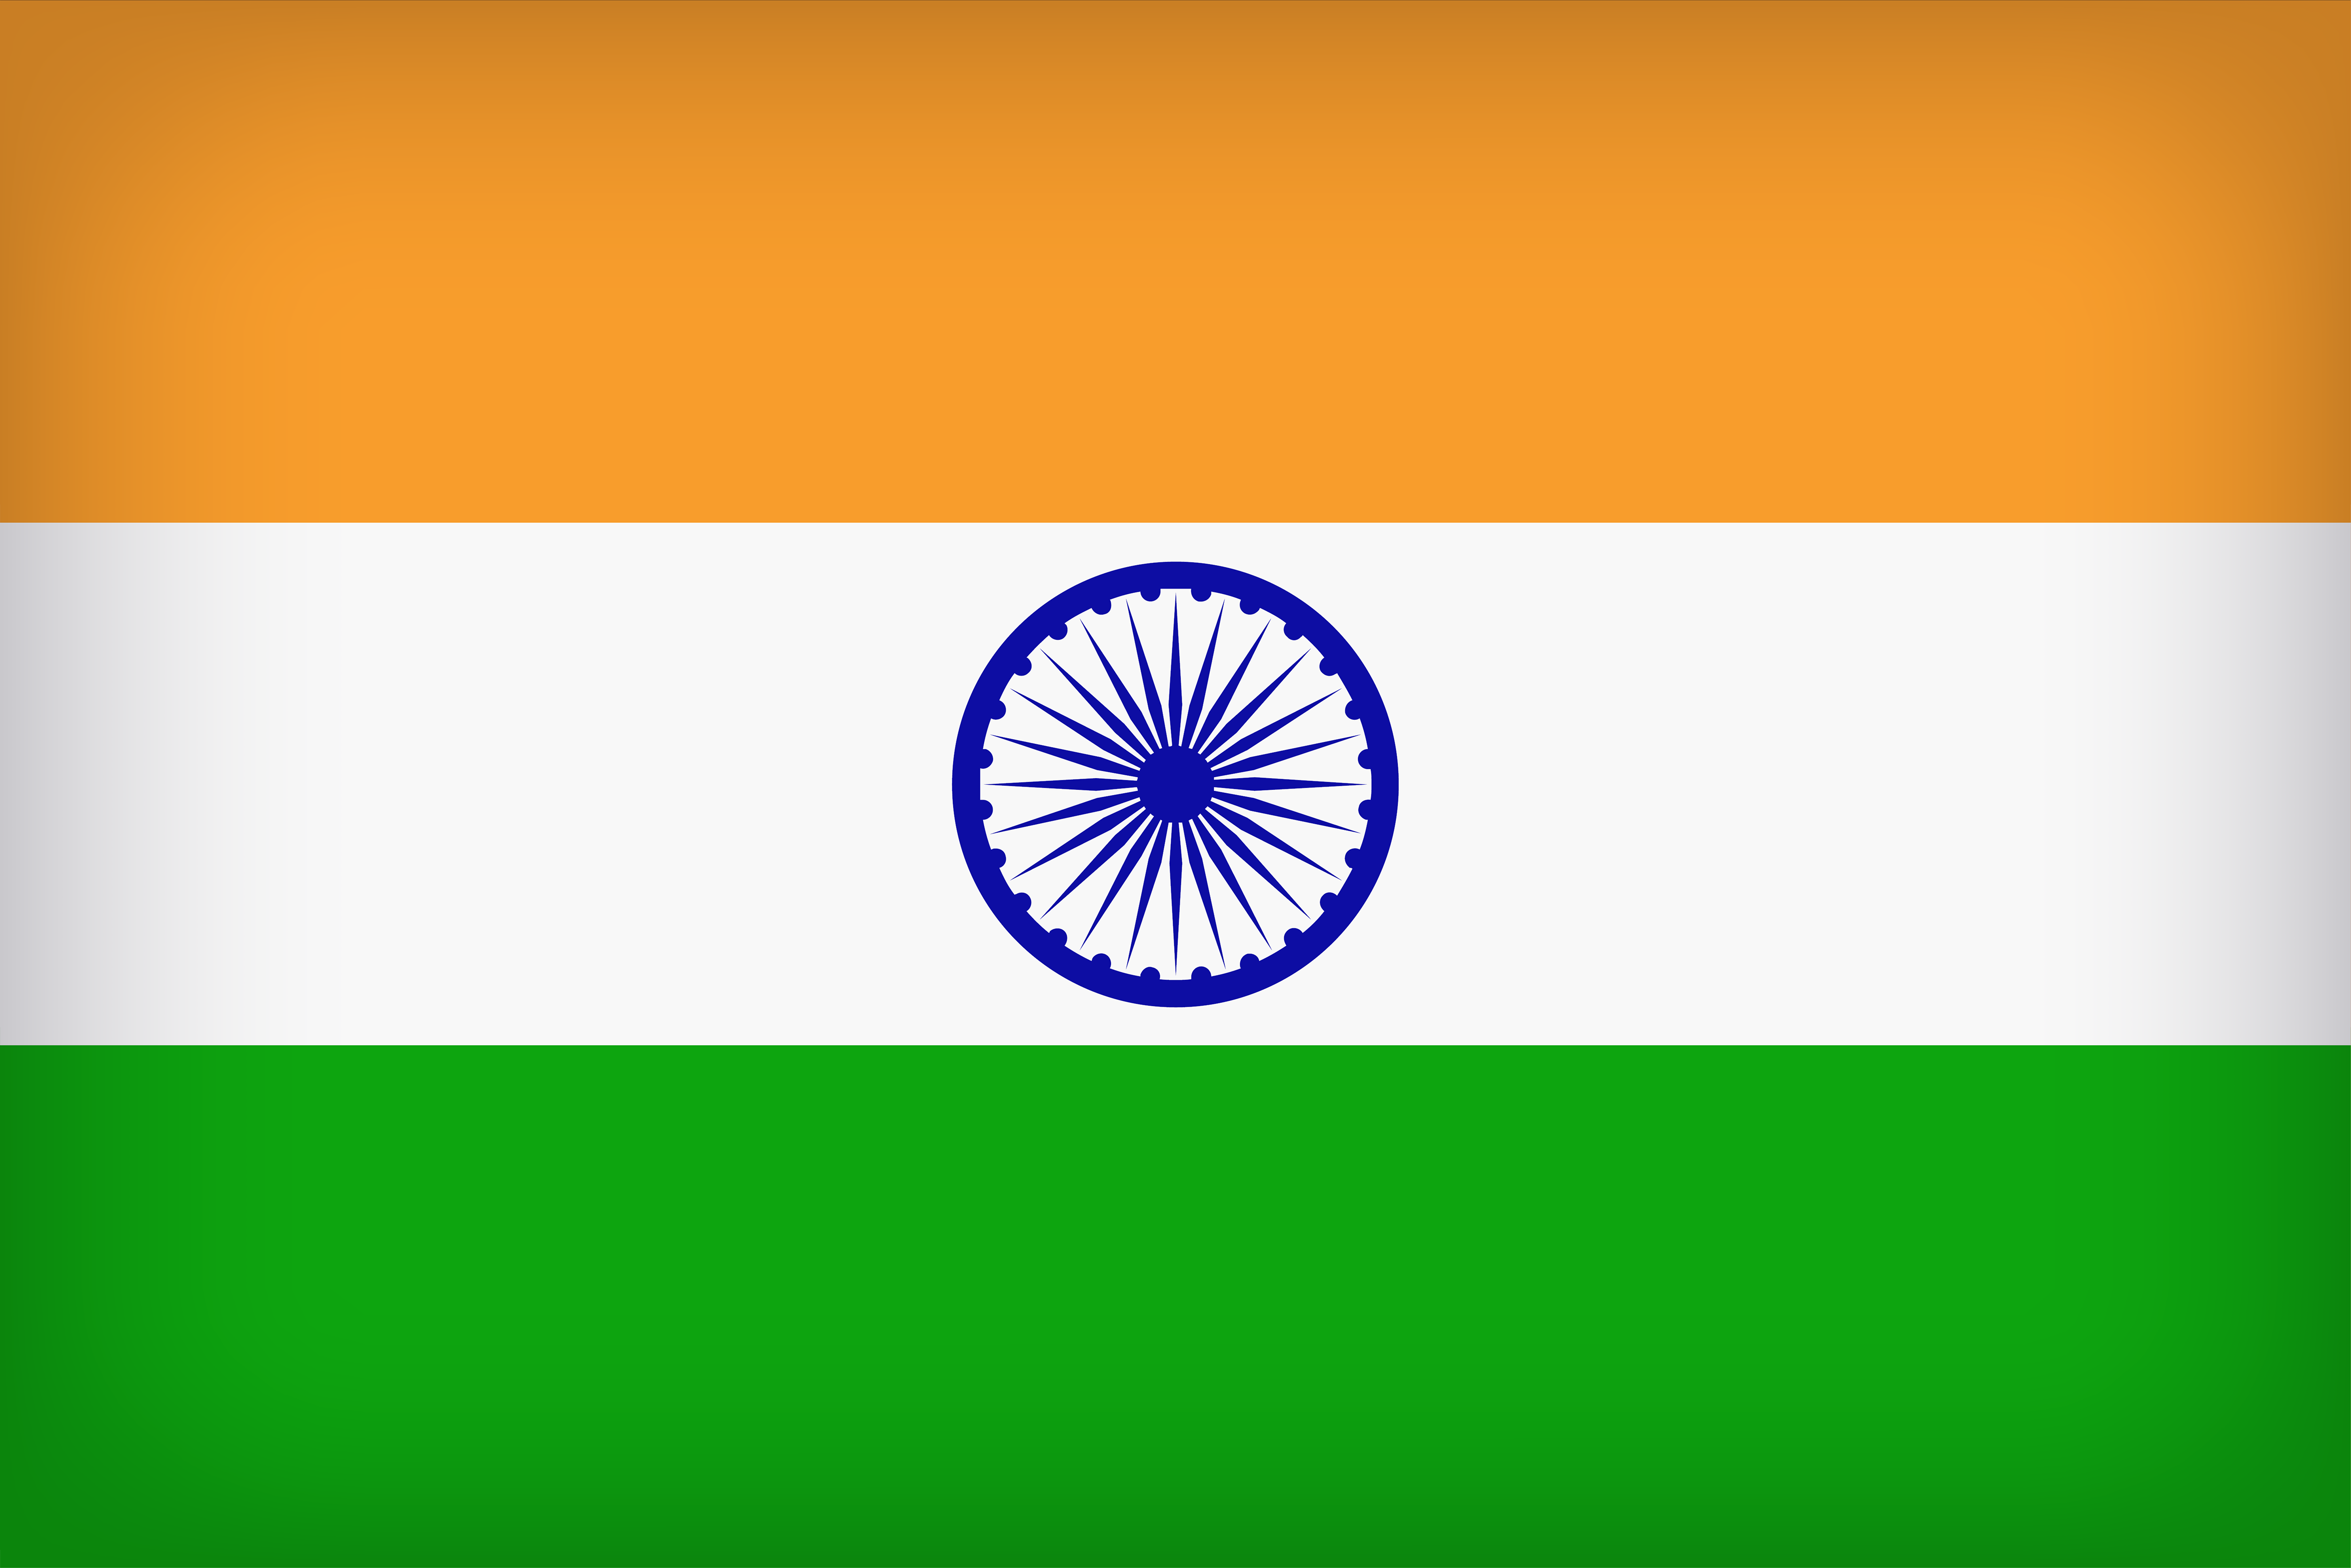 The National Flag of India by Paul Brennan 4k Ultra HD Wallpaper